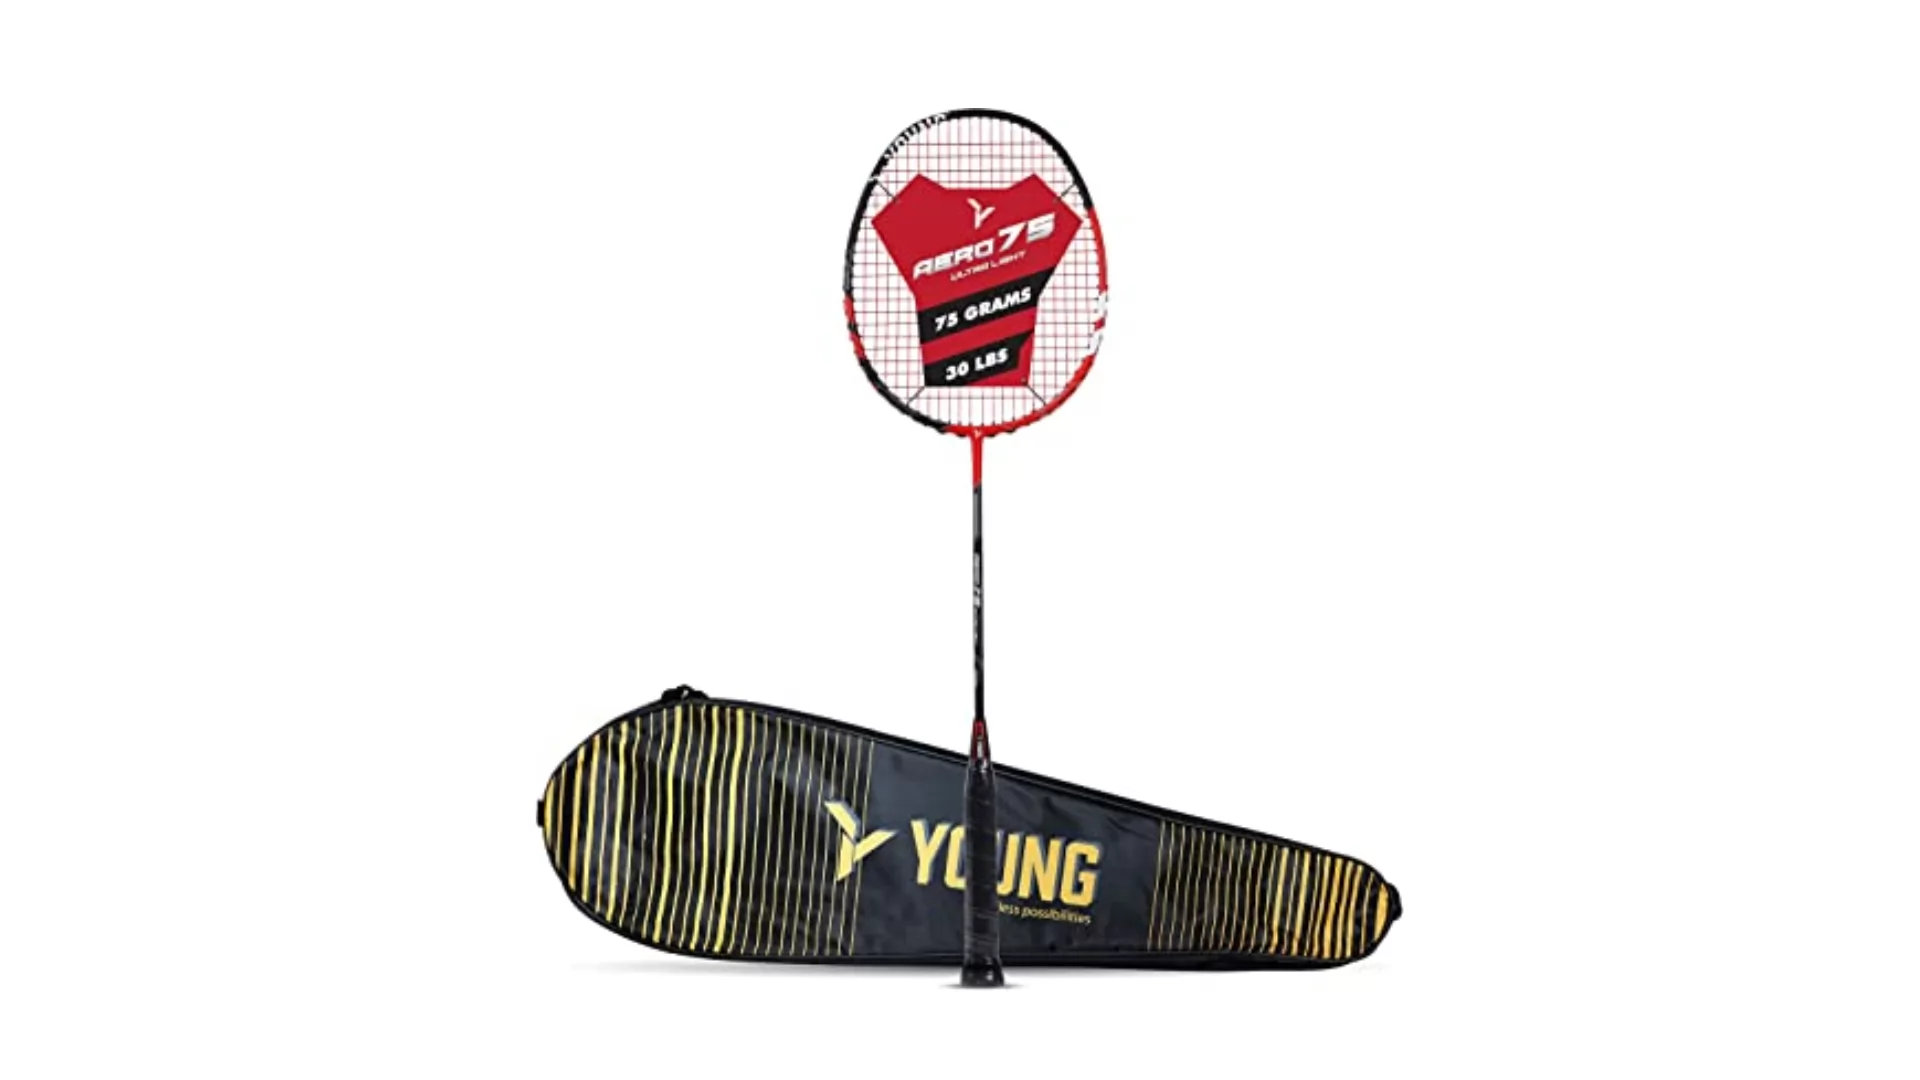 Young Wing Light 73 (73g, 30LBS) Strung Badminton Racquet with Full Cover